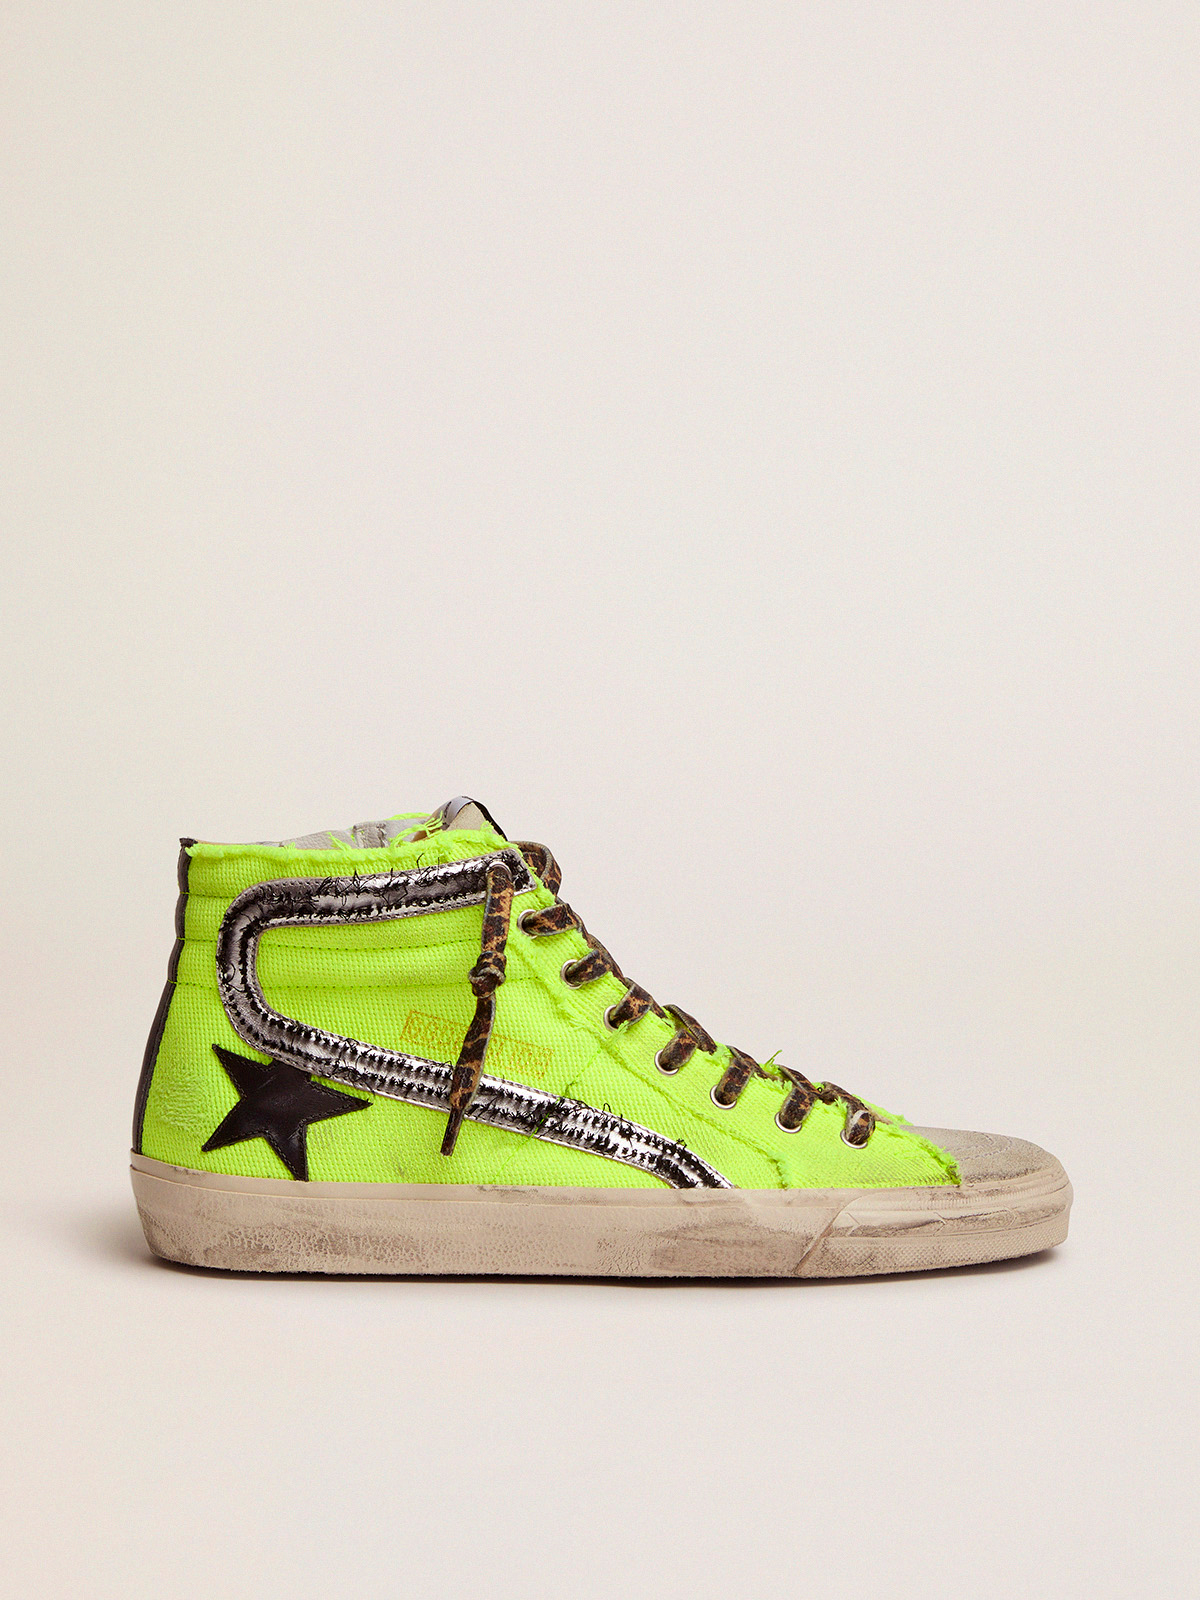 Slide sneakers in fluorescent yellow canvas with black star | Golden Goose